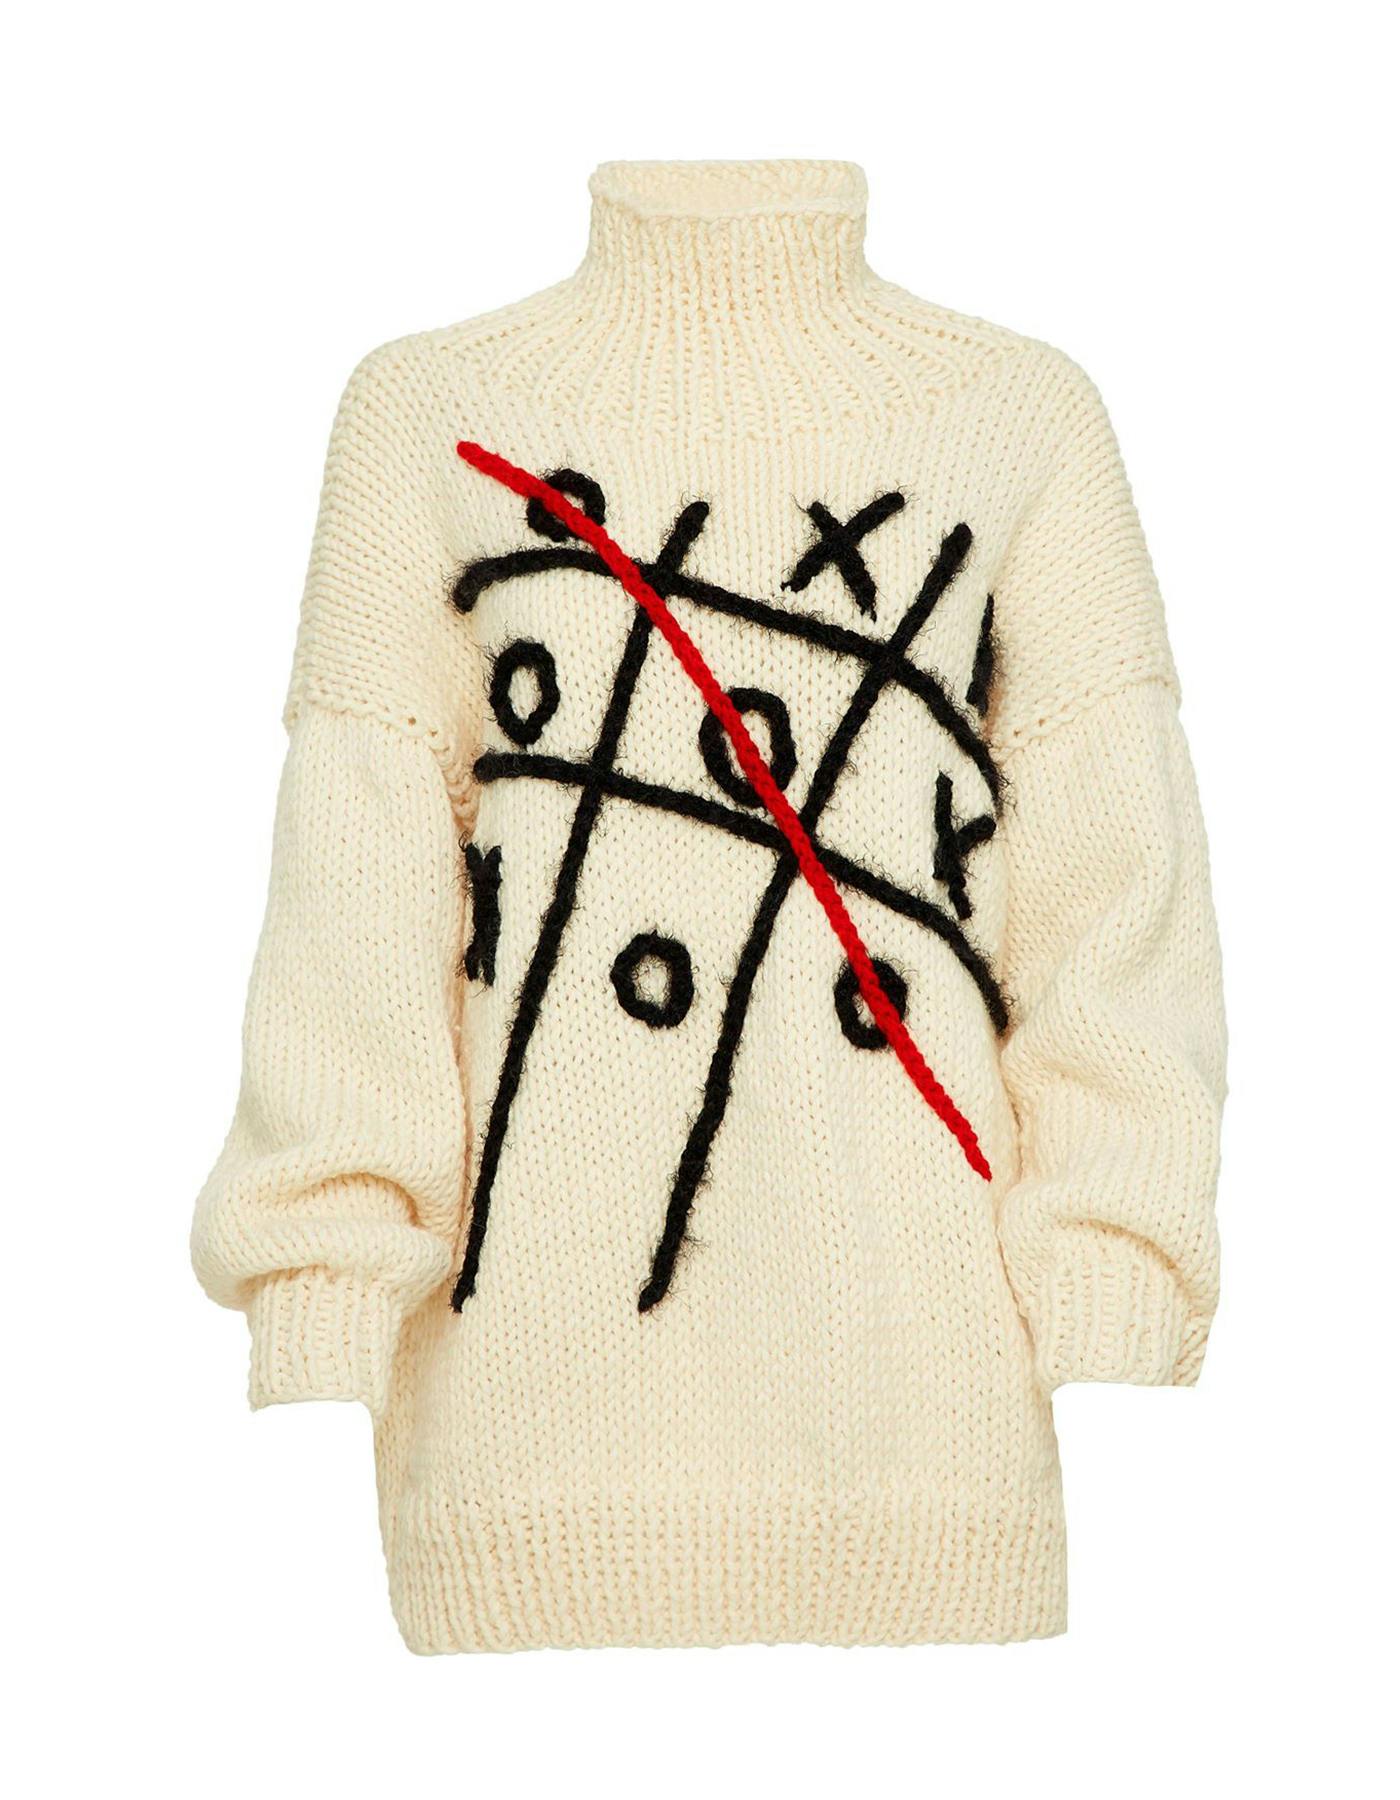 Hand-Knitted White Tic-Tac-Toe Sweater, a product by BLIKVANGER